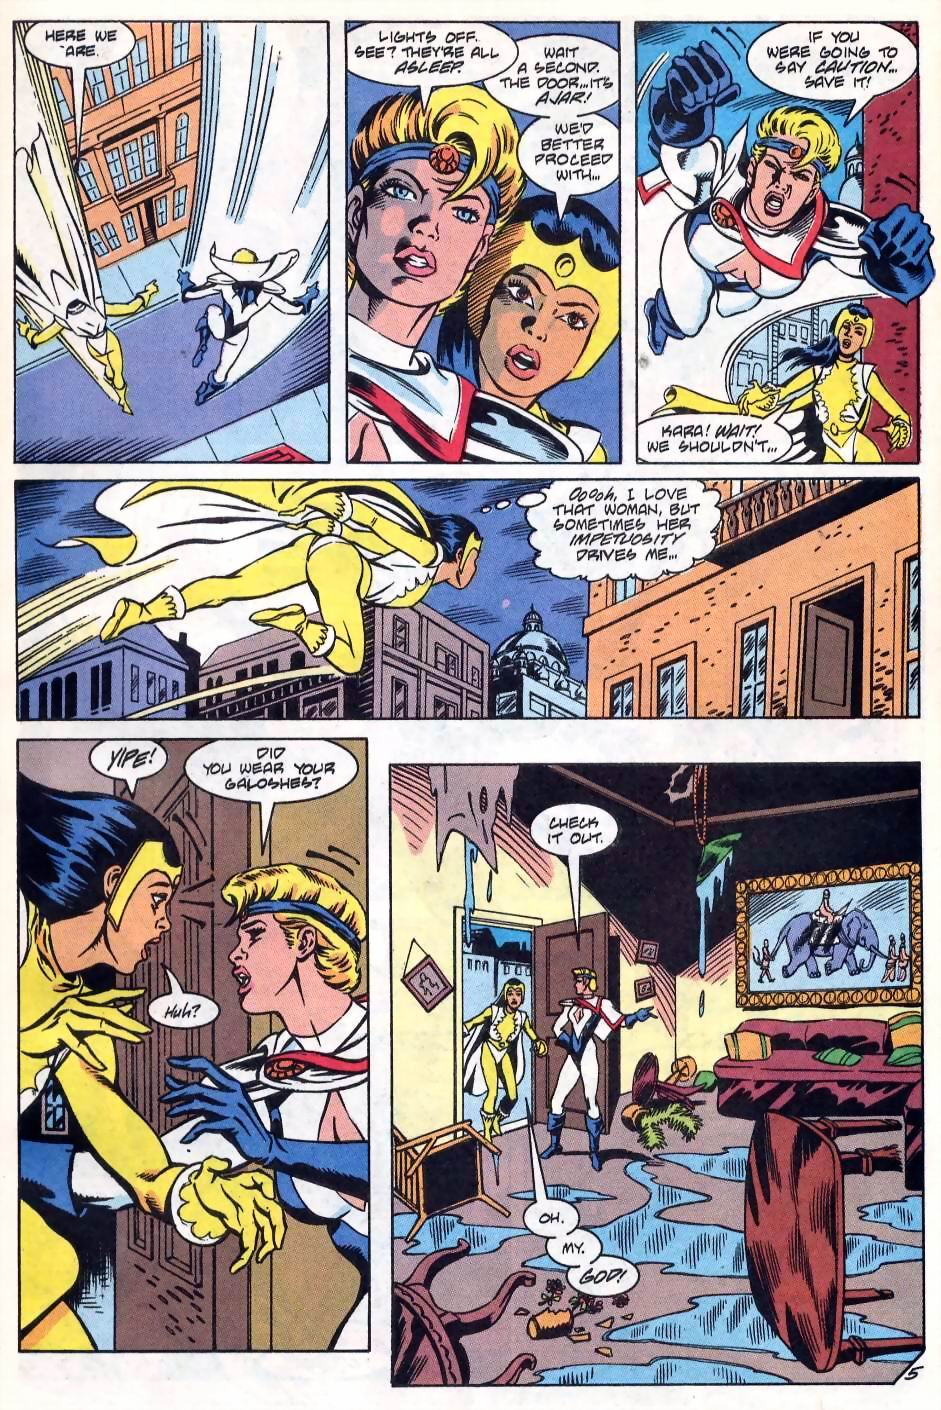 Justice League International (1993) 52 Page 5